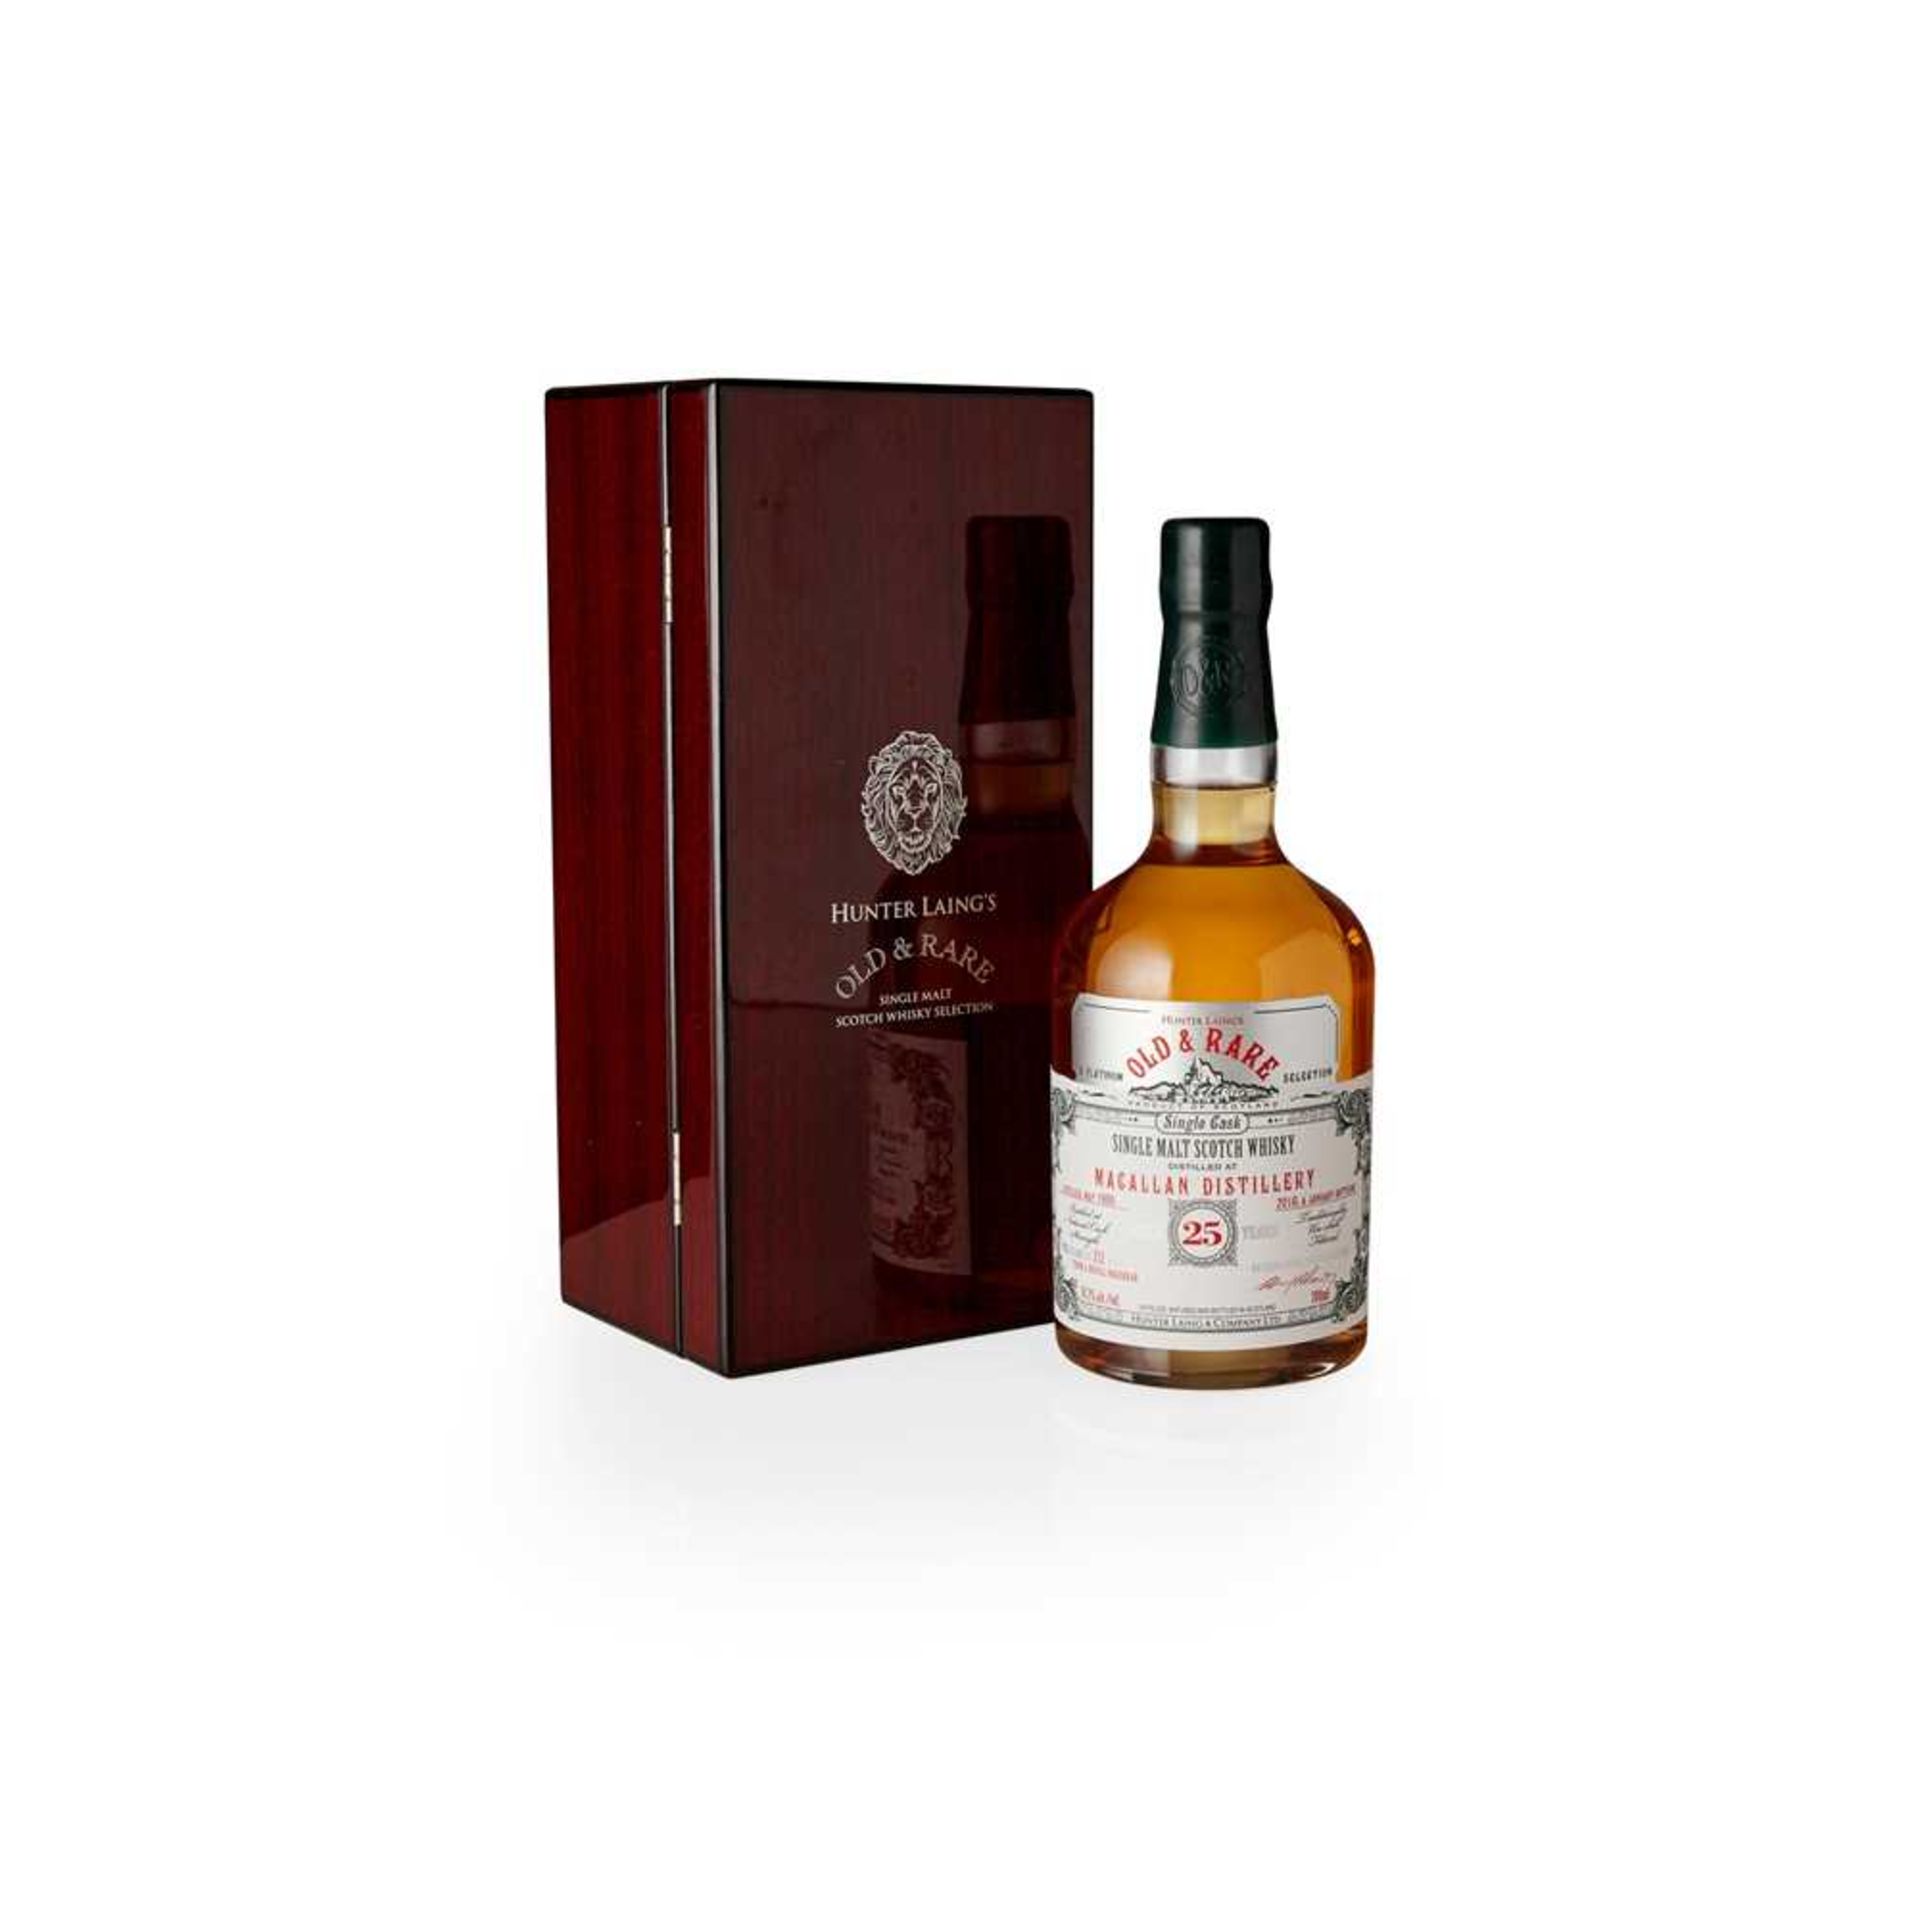 THE MACALLAN 1990 25 YEAR OLD - HUNTER LAING OLD & RARE